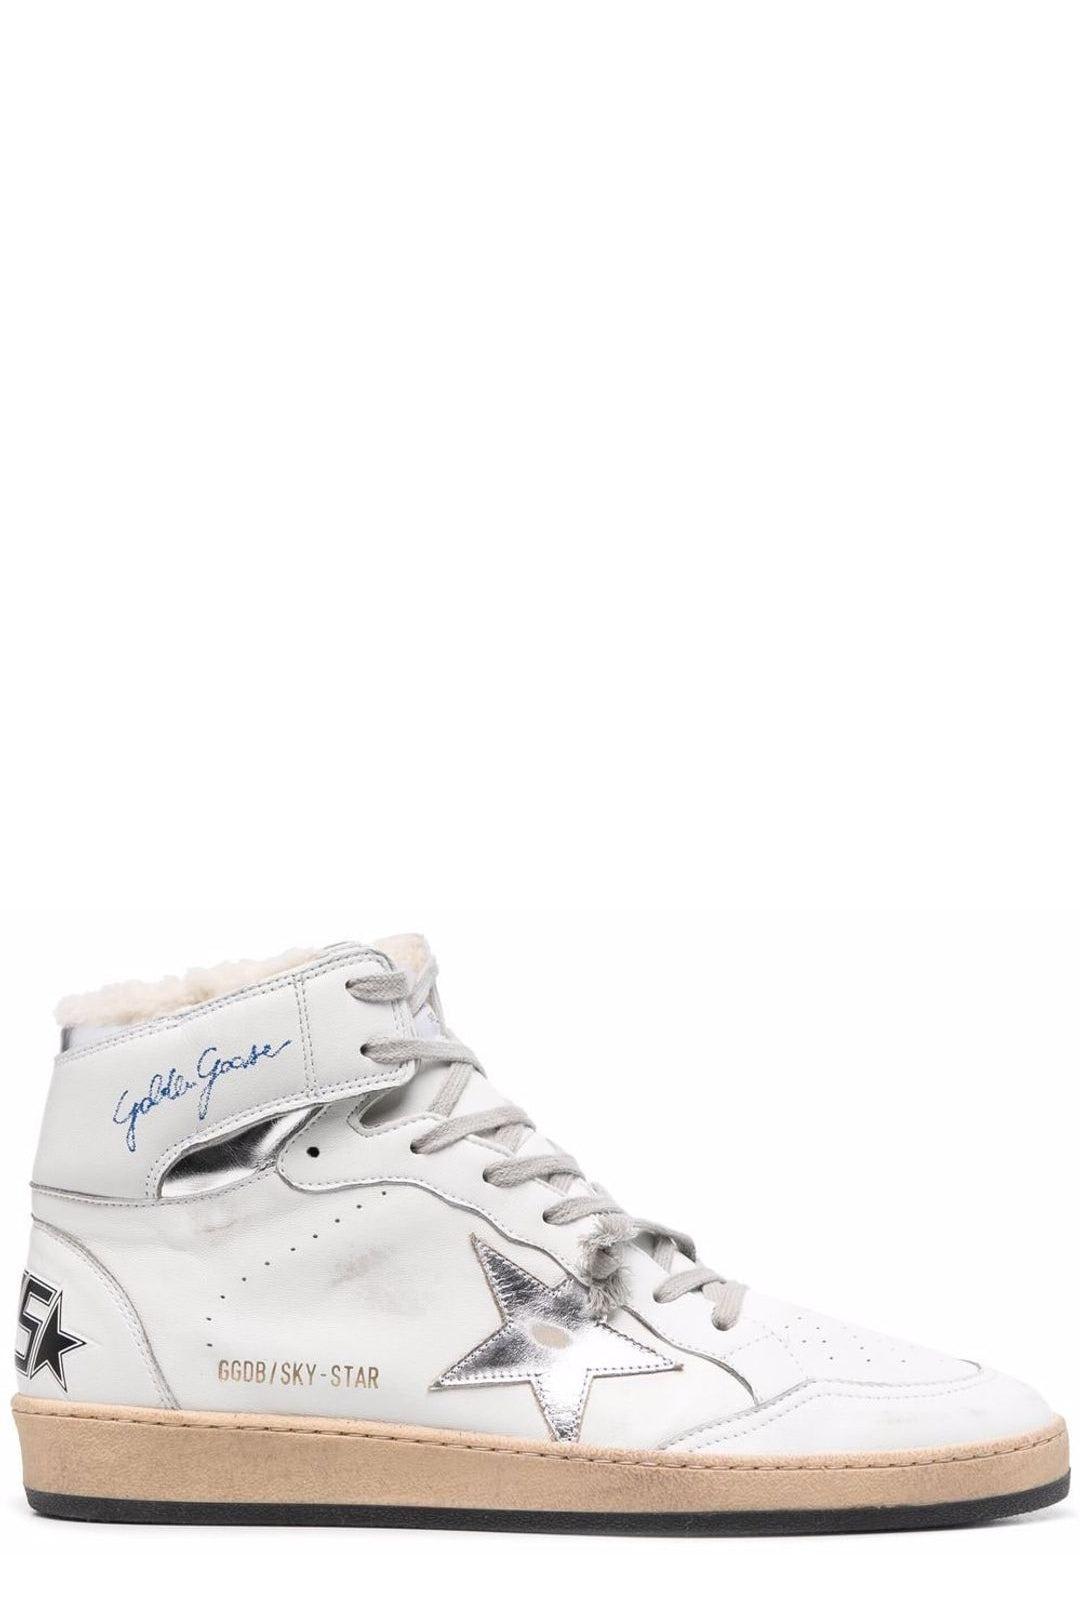 Golden Goose Star Patch Lace-up Sneakers